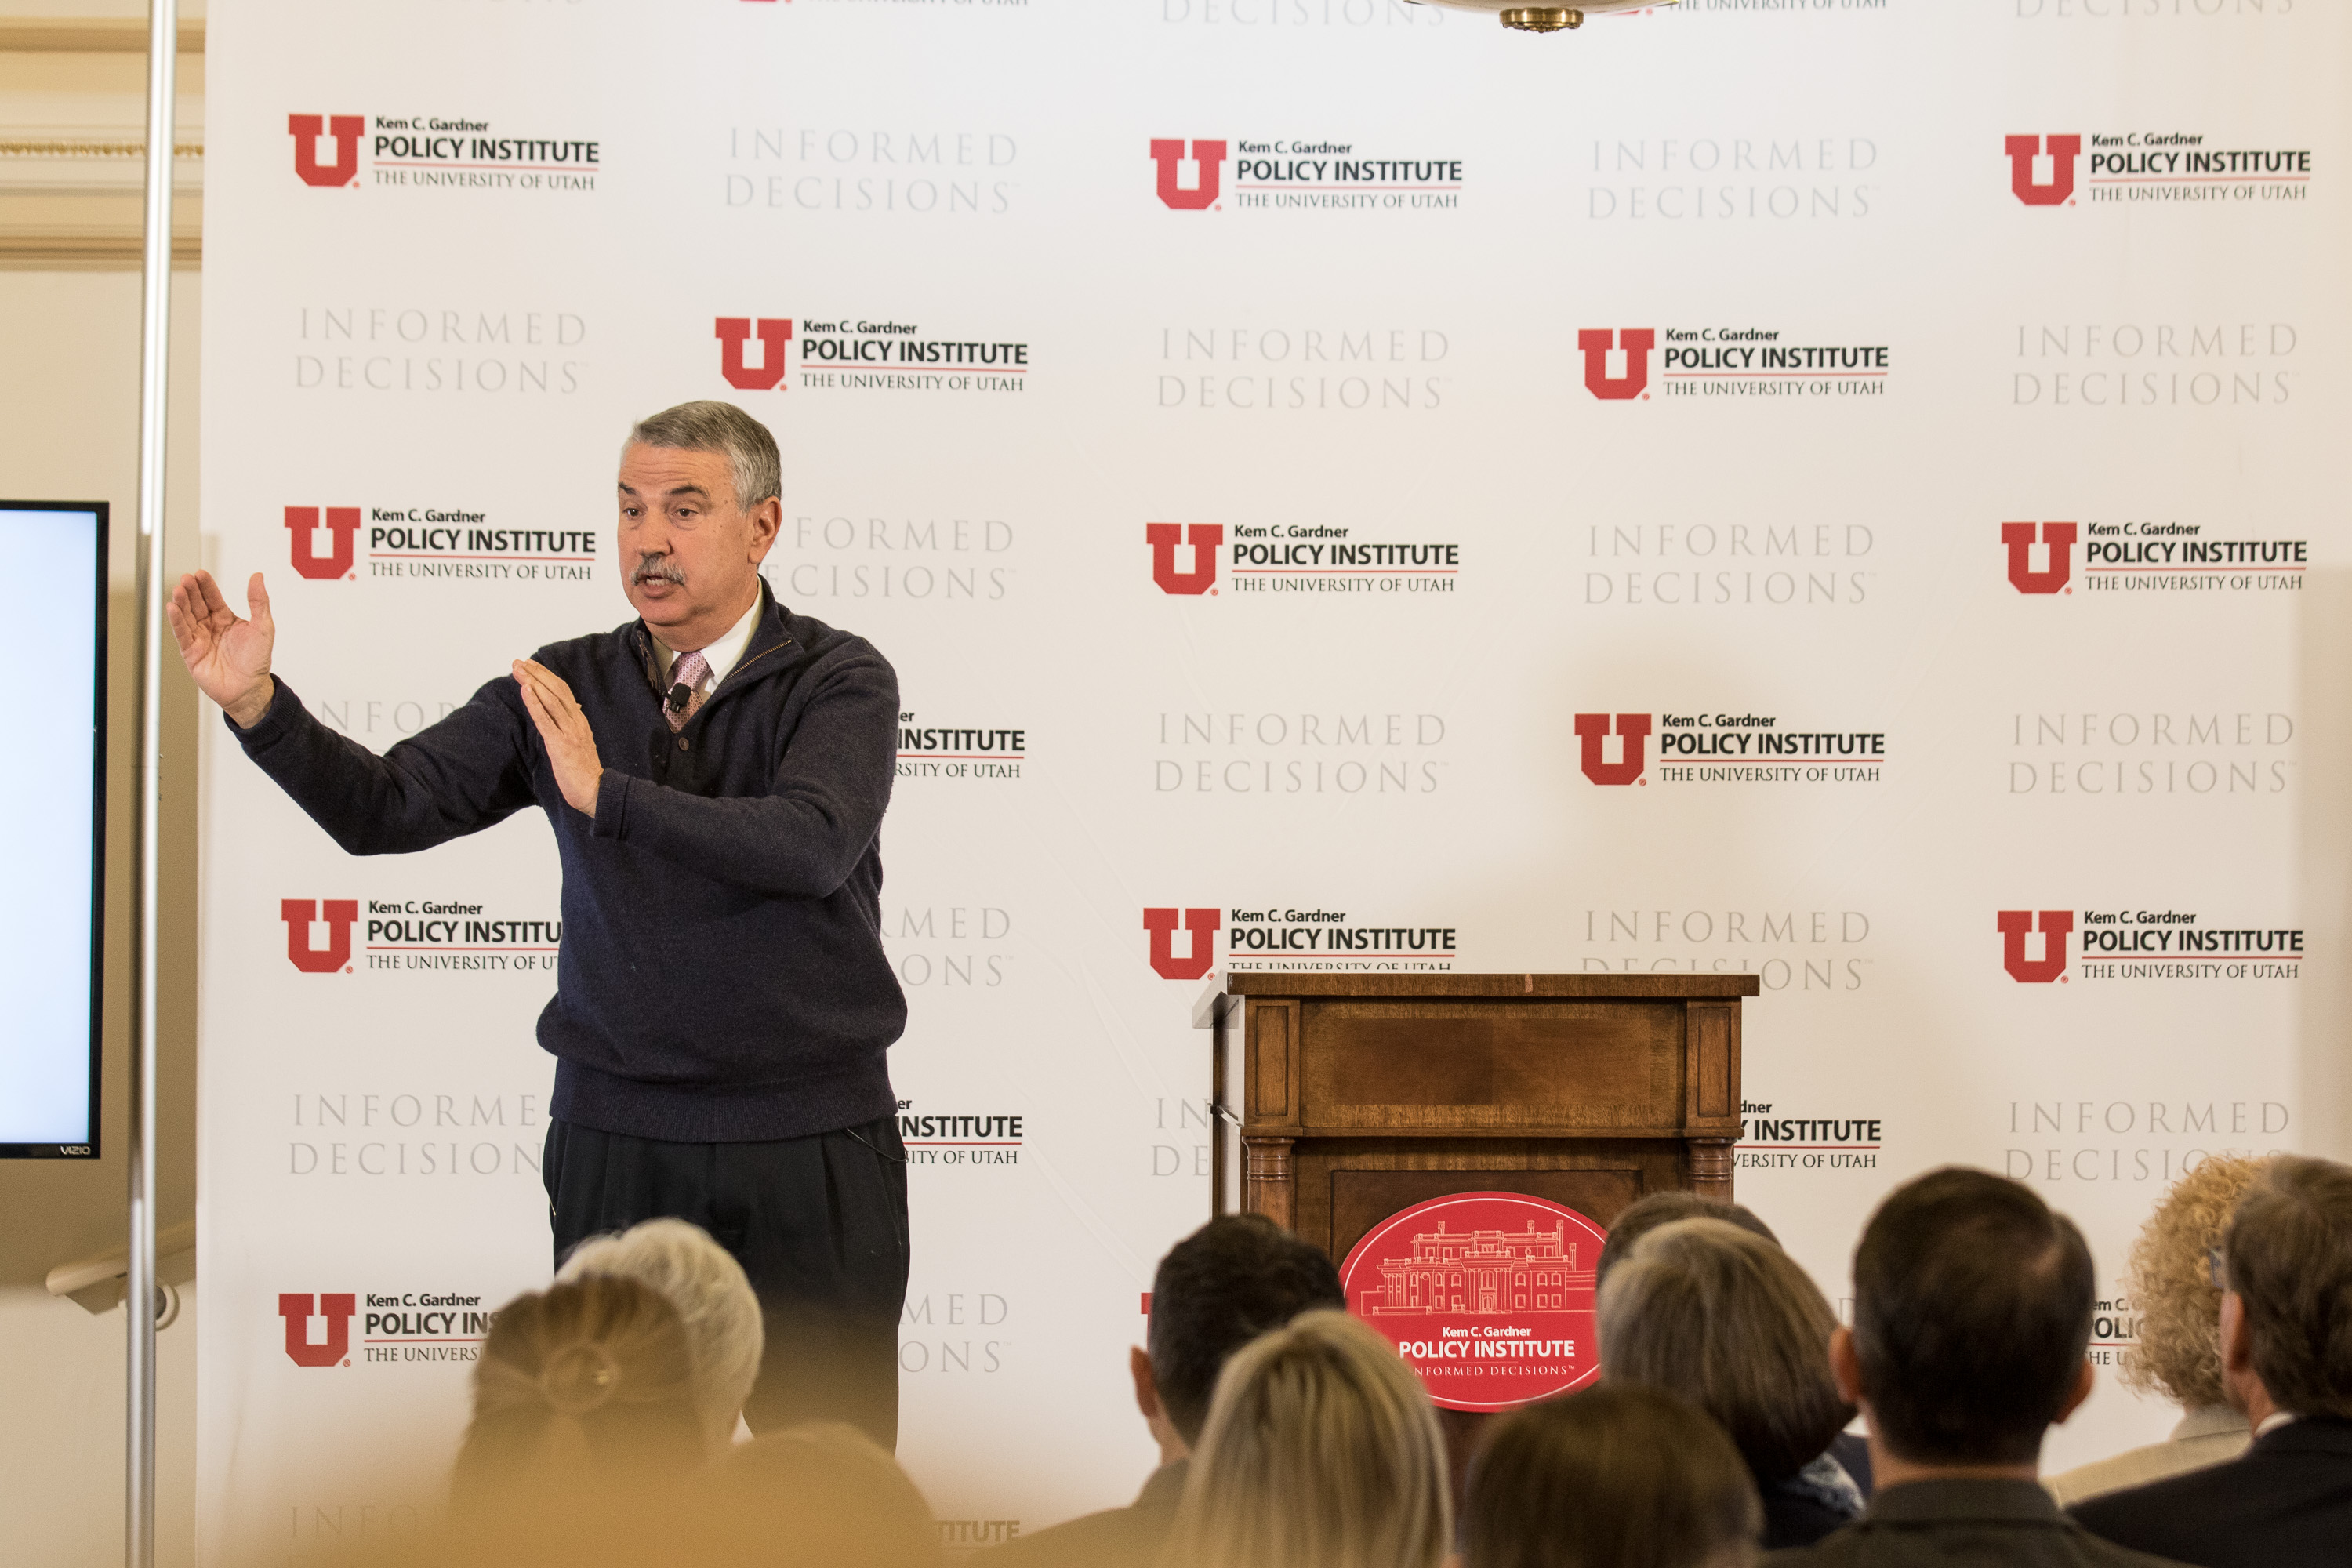 Learning from three-time Pulitzer Prize winner Tom Friedman